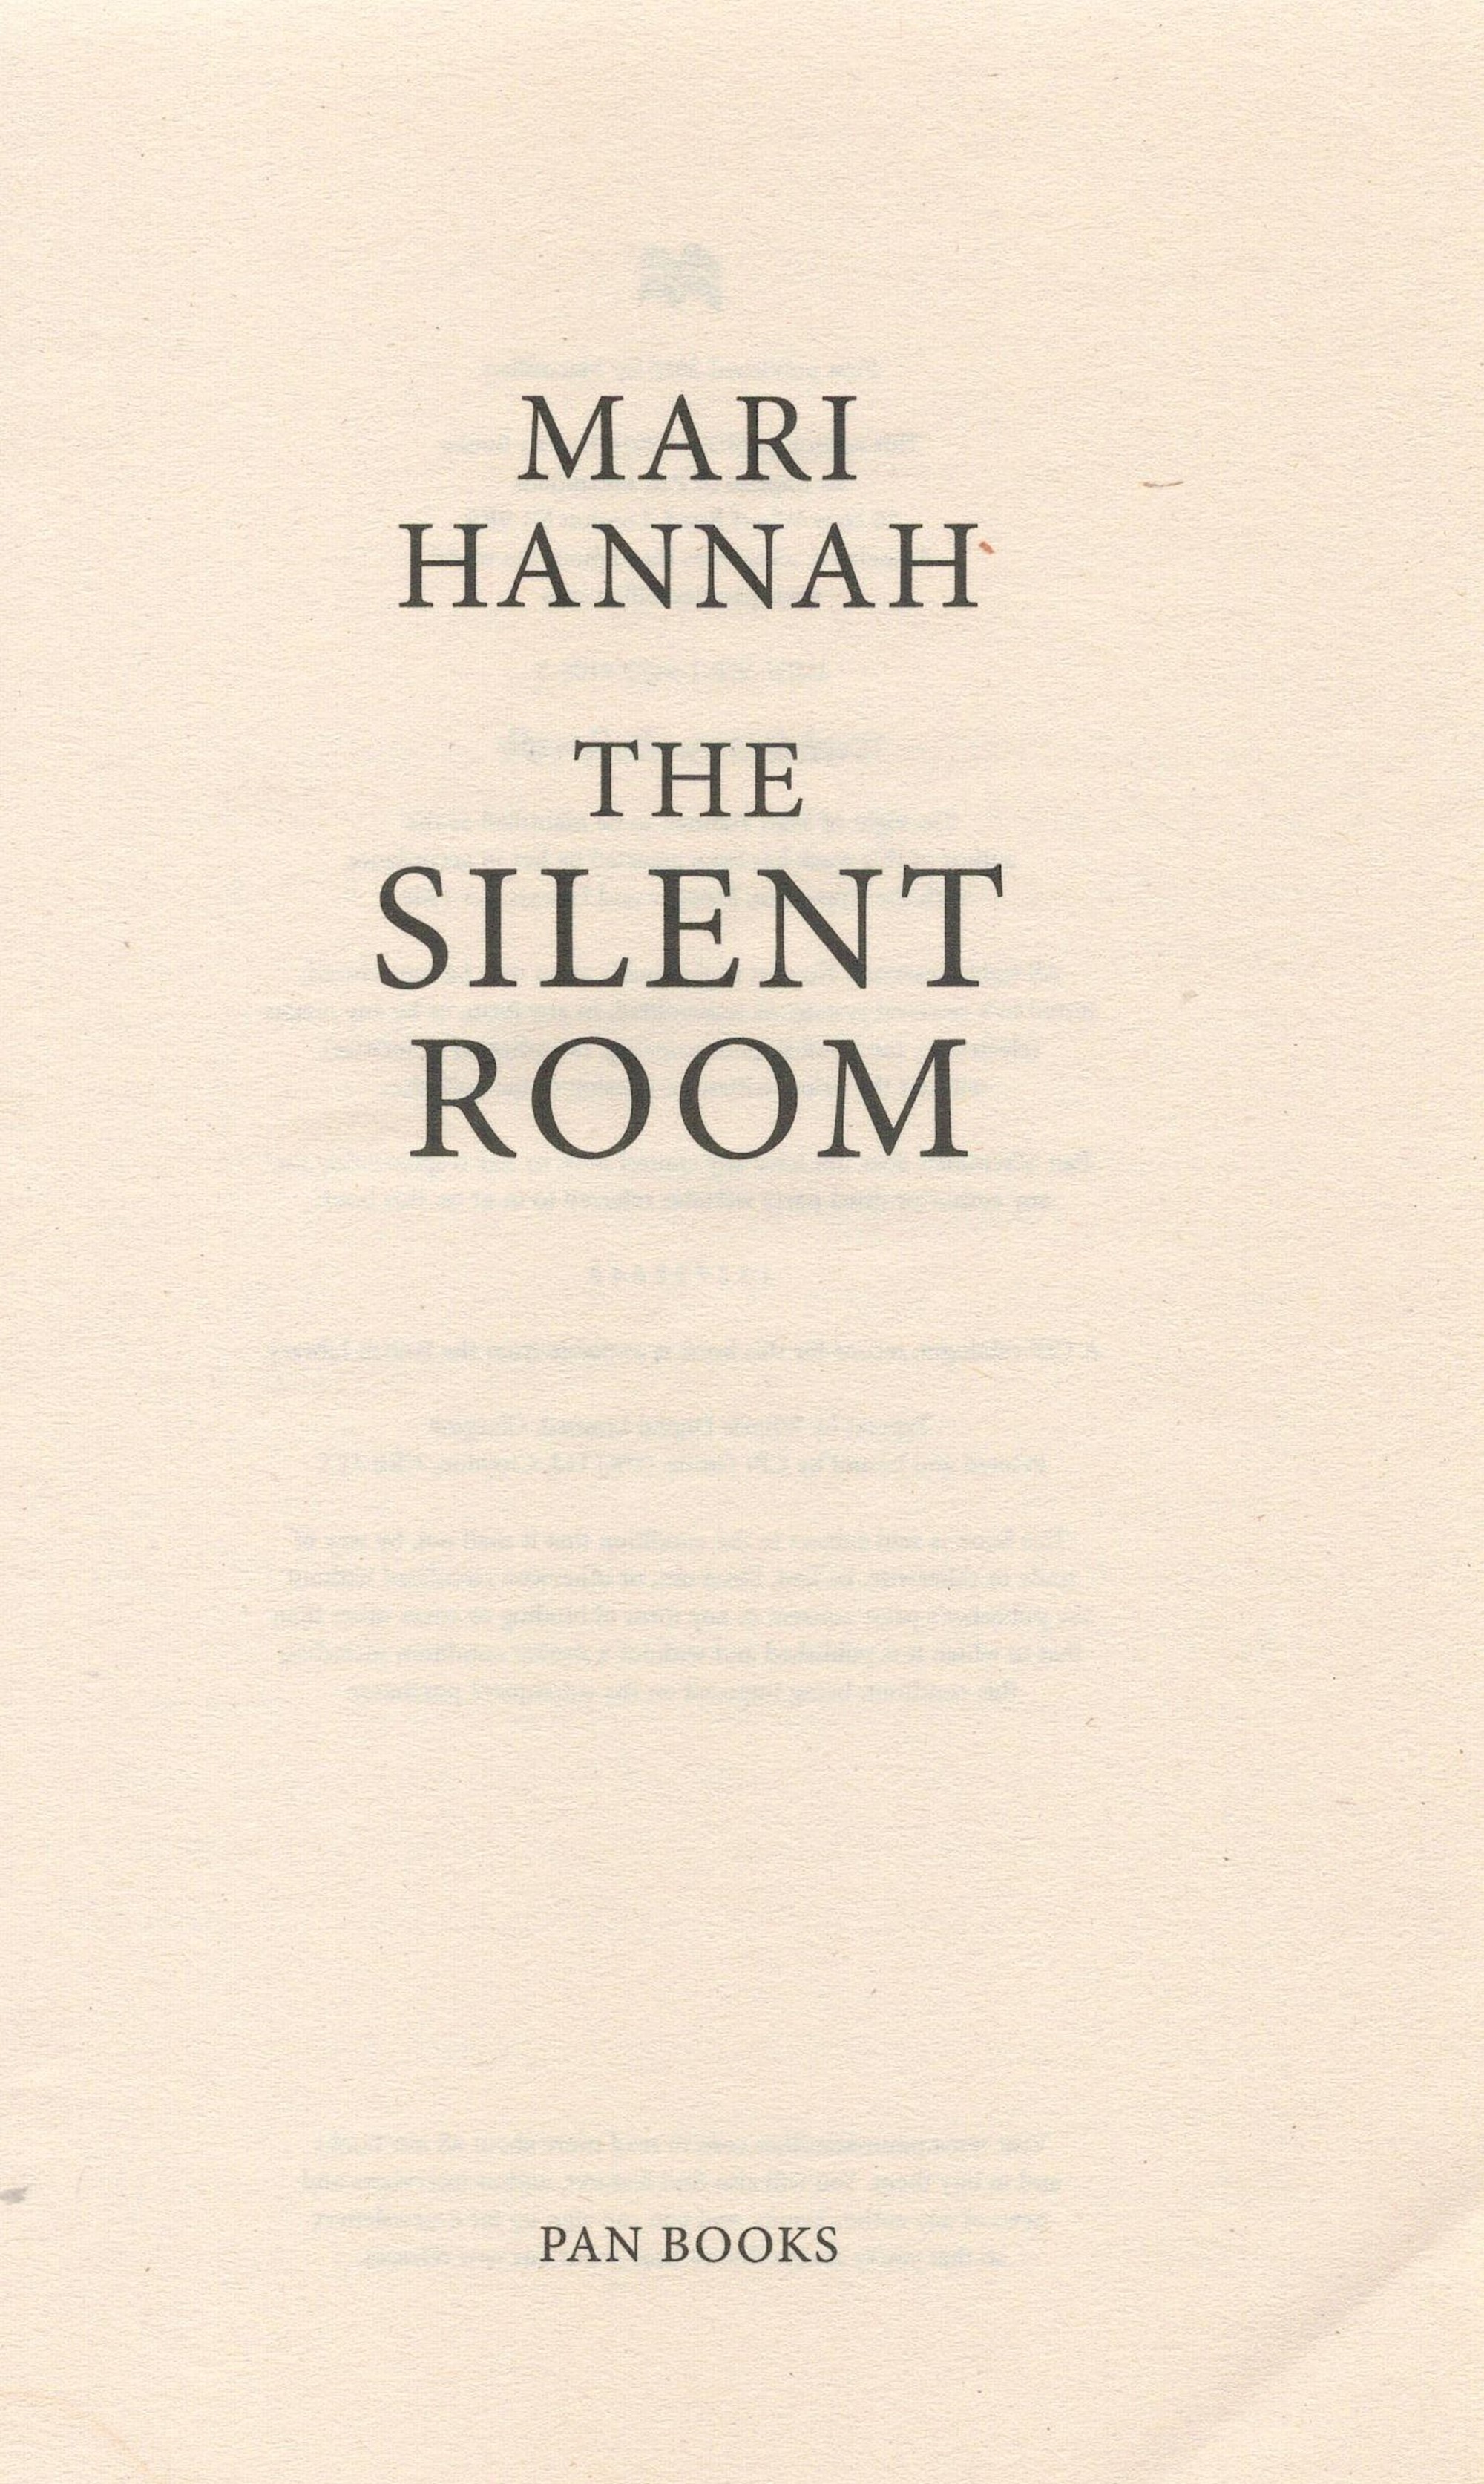 The Silent Room by Mari Hannah Softback Book 2015 First Edition published by Pan Books some ageing - Image 4 of 6